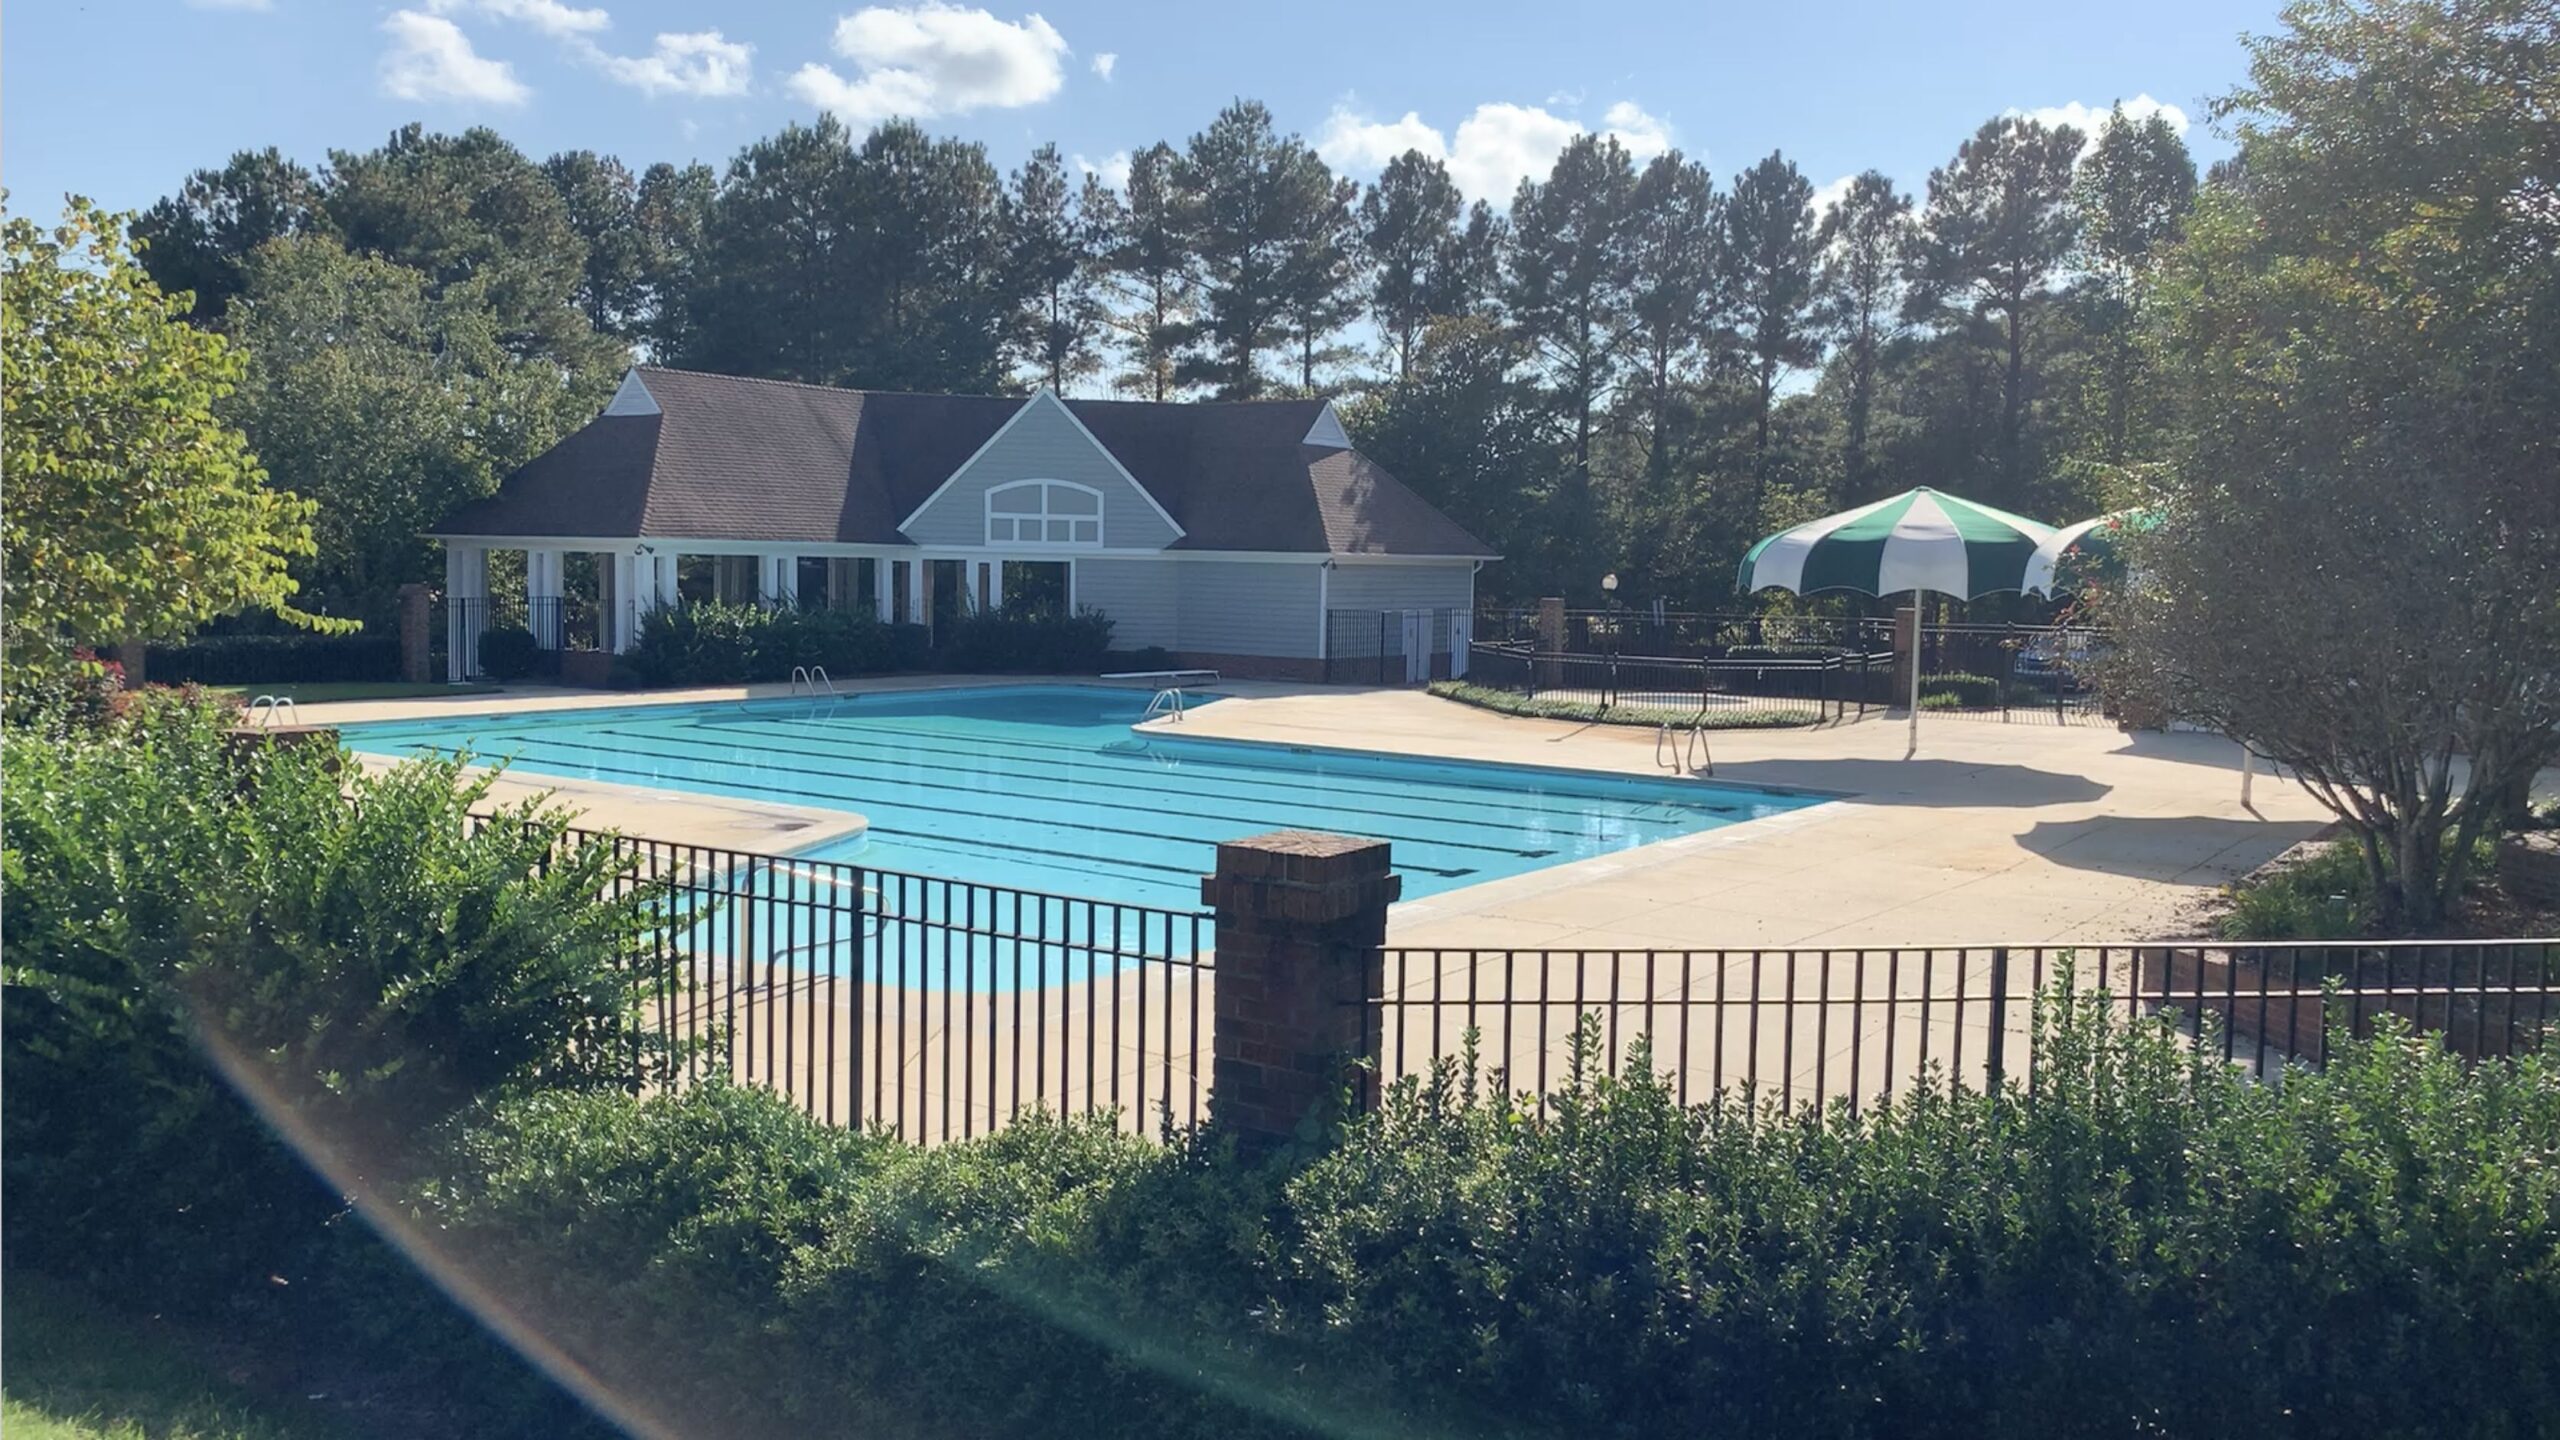 The Swim and Racquet Club are optional memberships